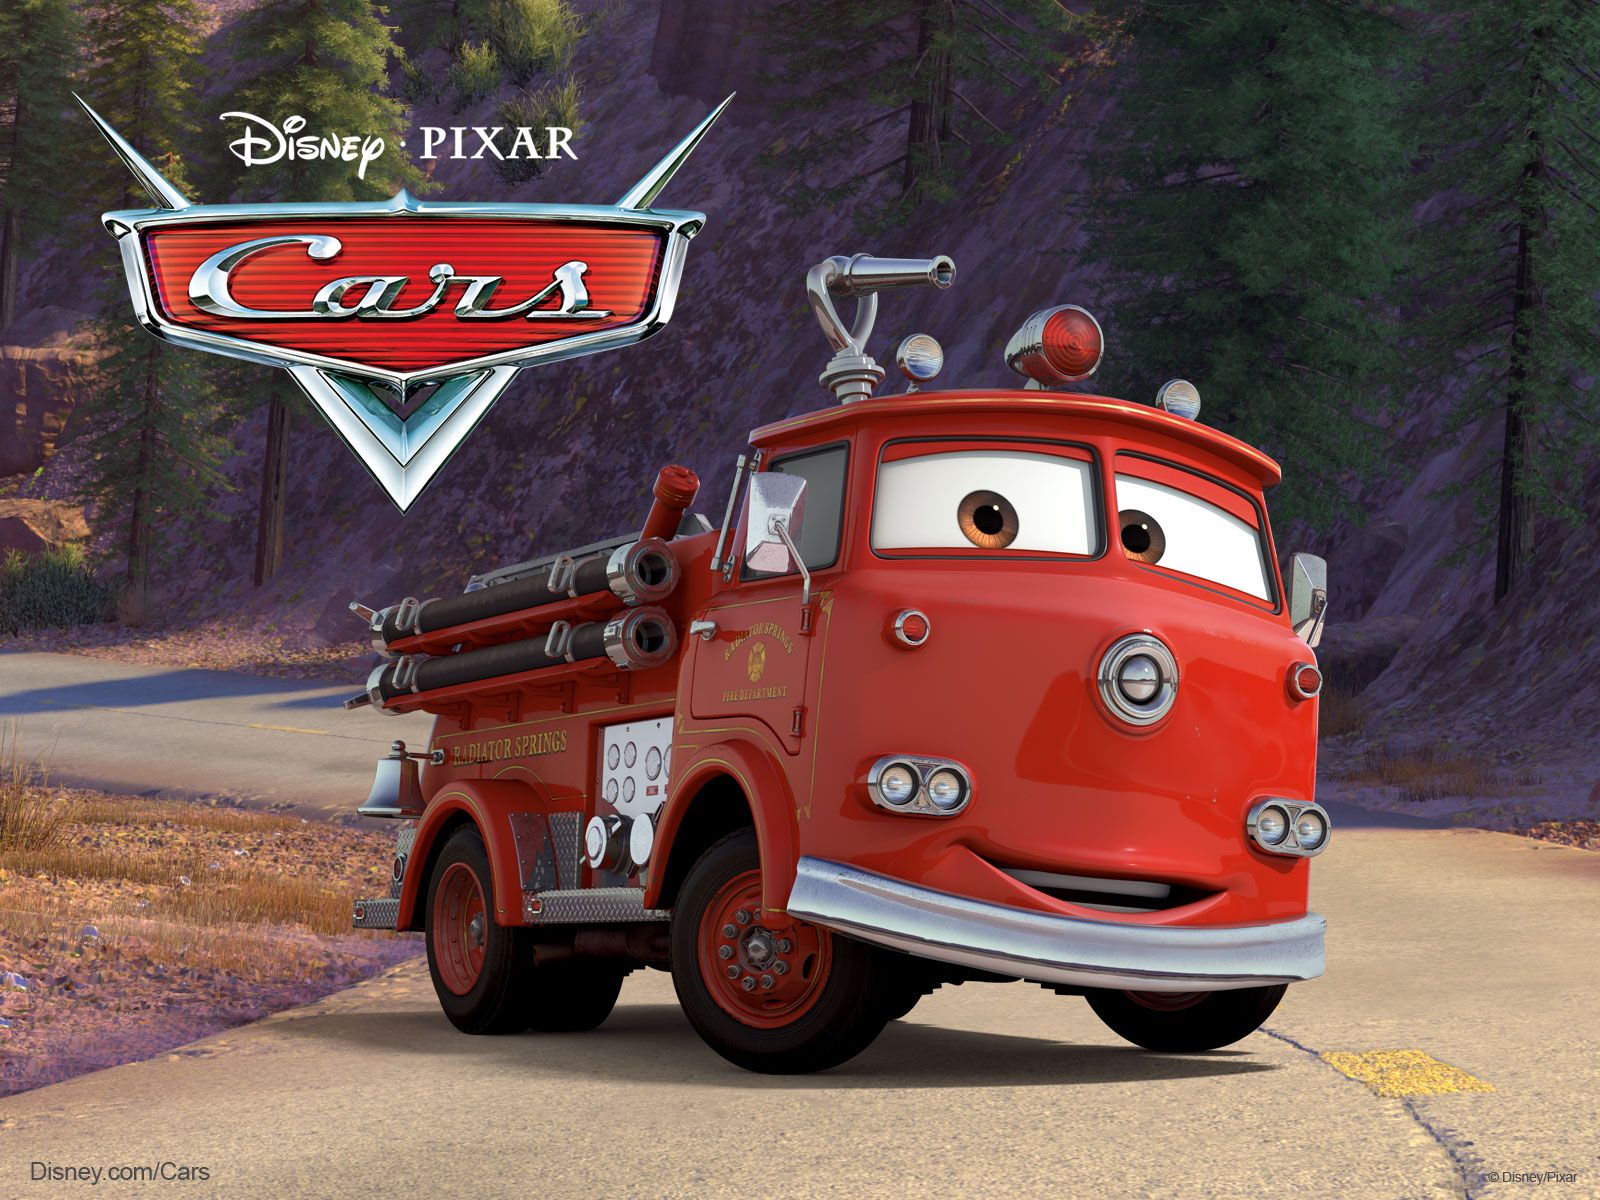 Red The Fire Engine From Pixar Cars Cartoon Film Wallpaper - Cars 1 Fire Truck , HD Wallpaper & Backgrounds